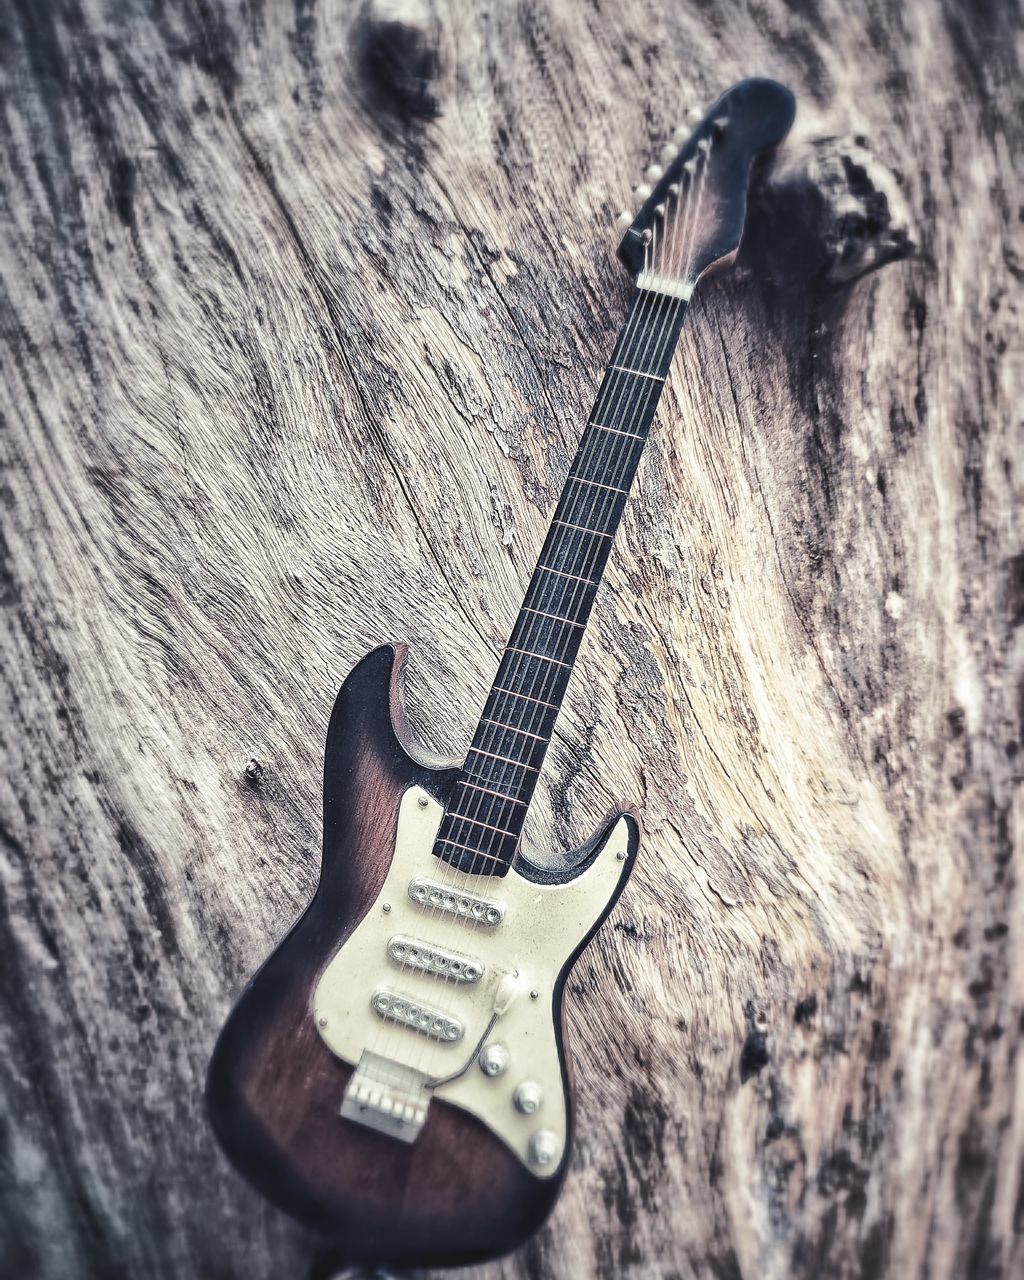 HIGH ANGLE VIEW OF GUITAR ON TREE TRUNK